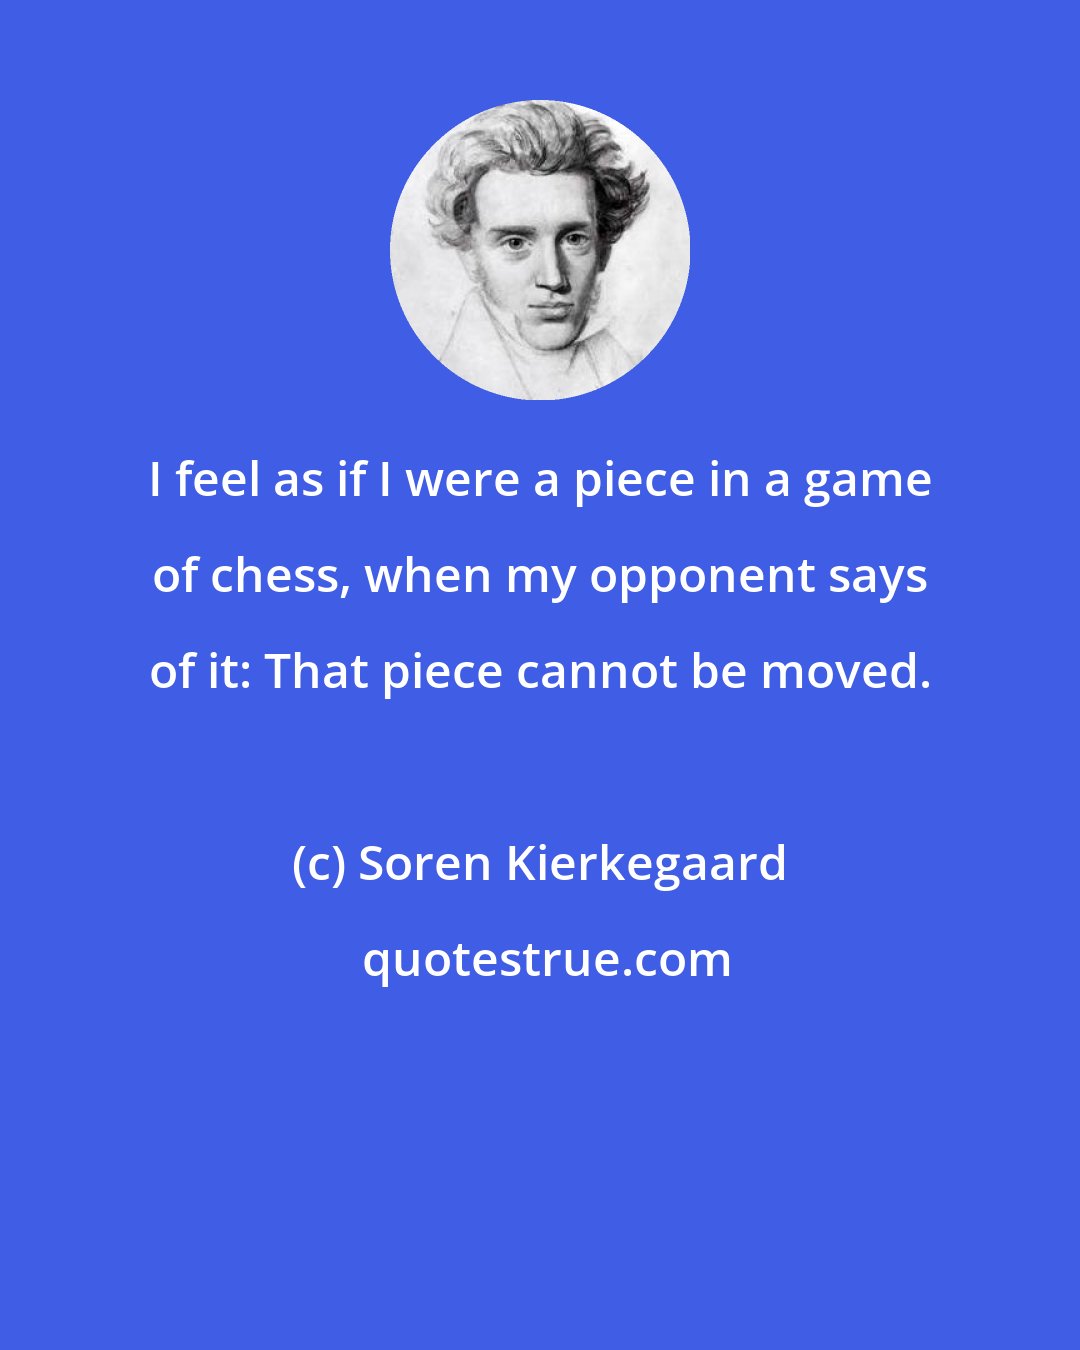 Soren Kierkegaard: I feel as if I were a piece in a game of chess, when my opponent says of it: That piece cannot be moved.